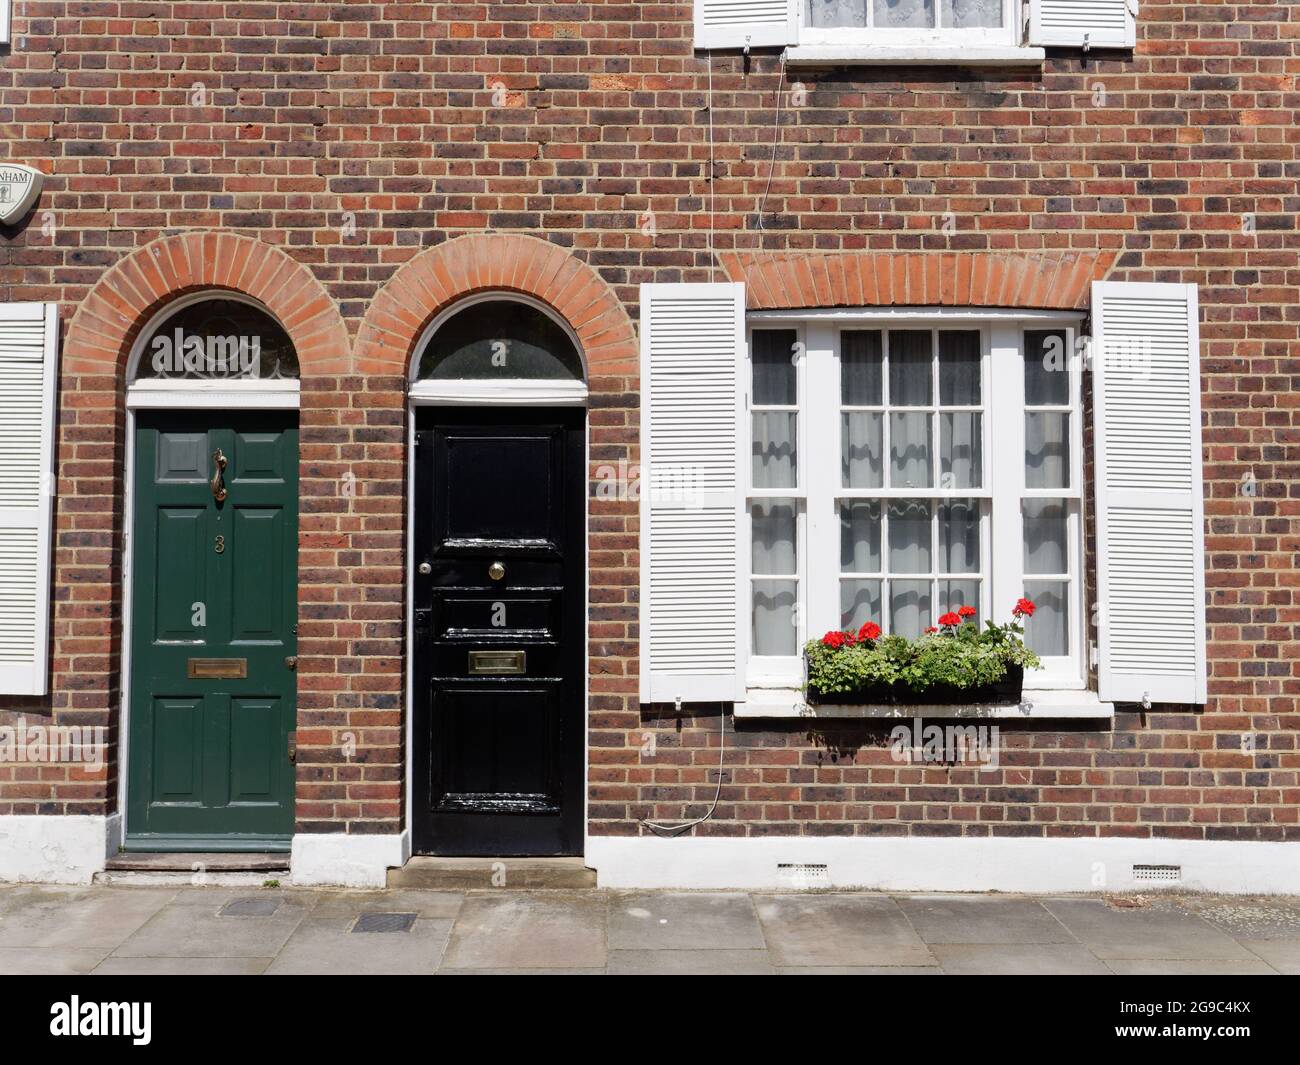 London, Greater London, England, June 12 2021: Green and black front doors of residential properties with a window box full of plants and flowers. Stock Photo